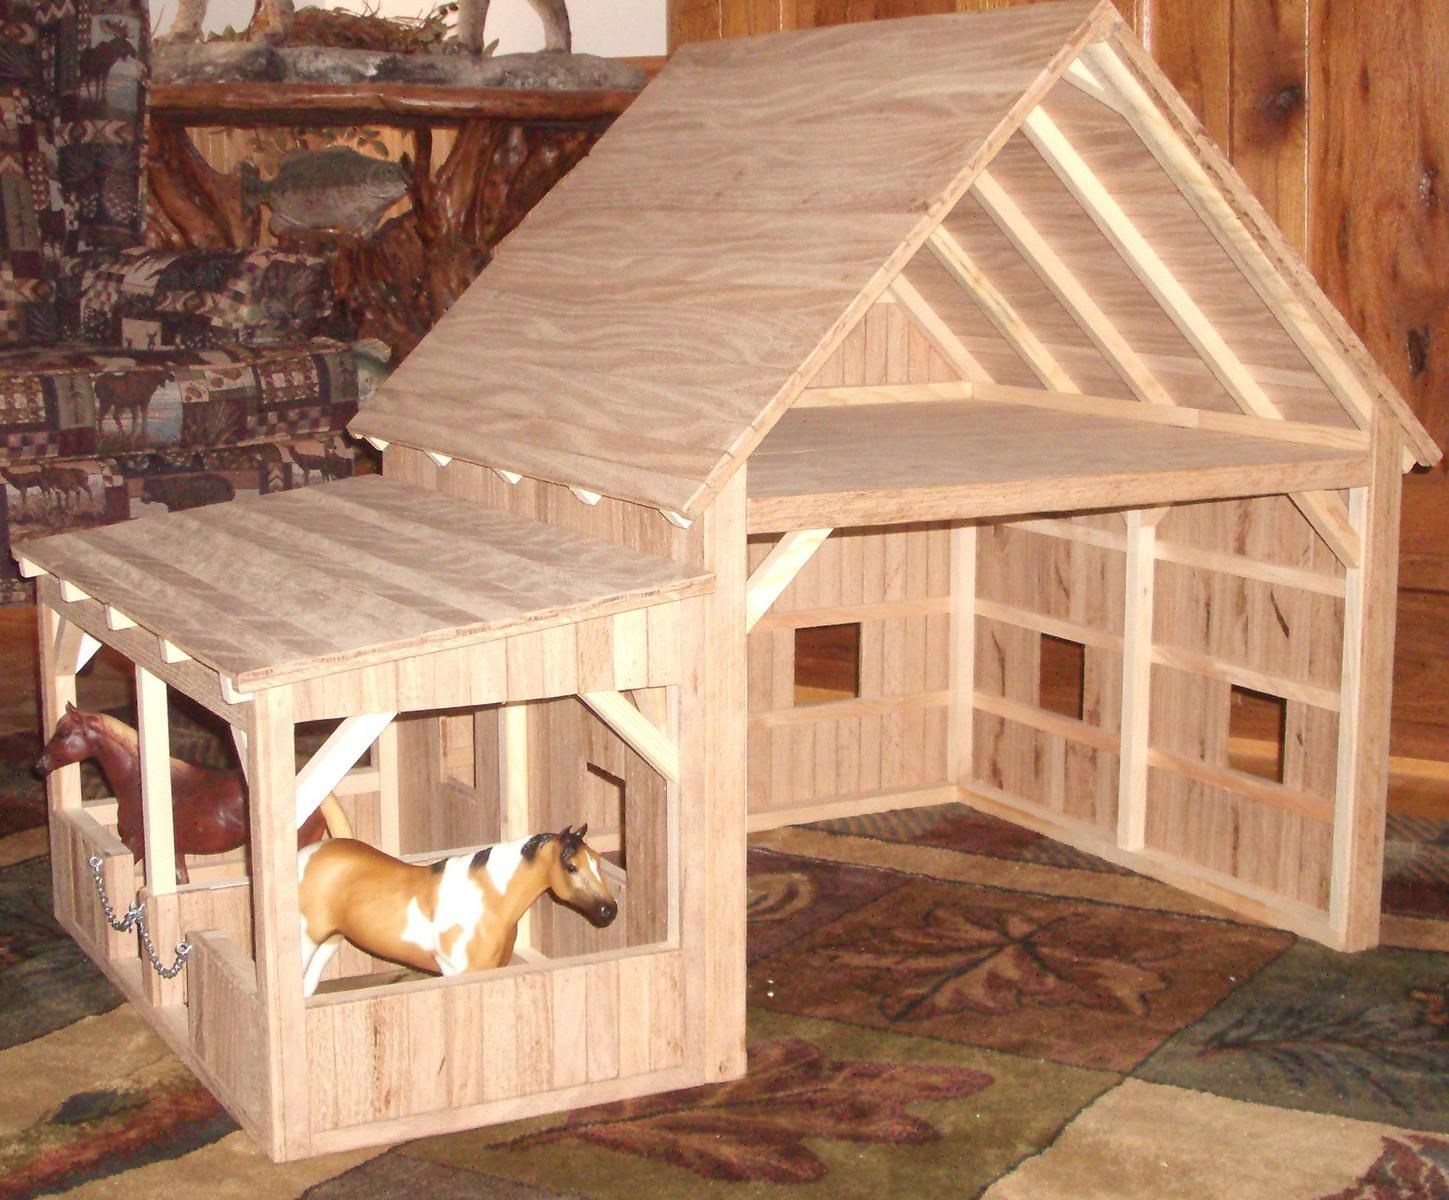 DIY Toy Barn Plans
 Pin by Amy Kastenbauer on For the Little es